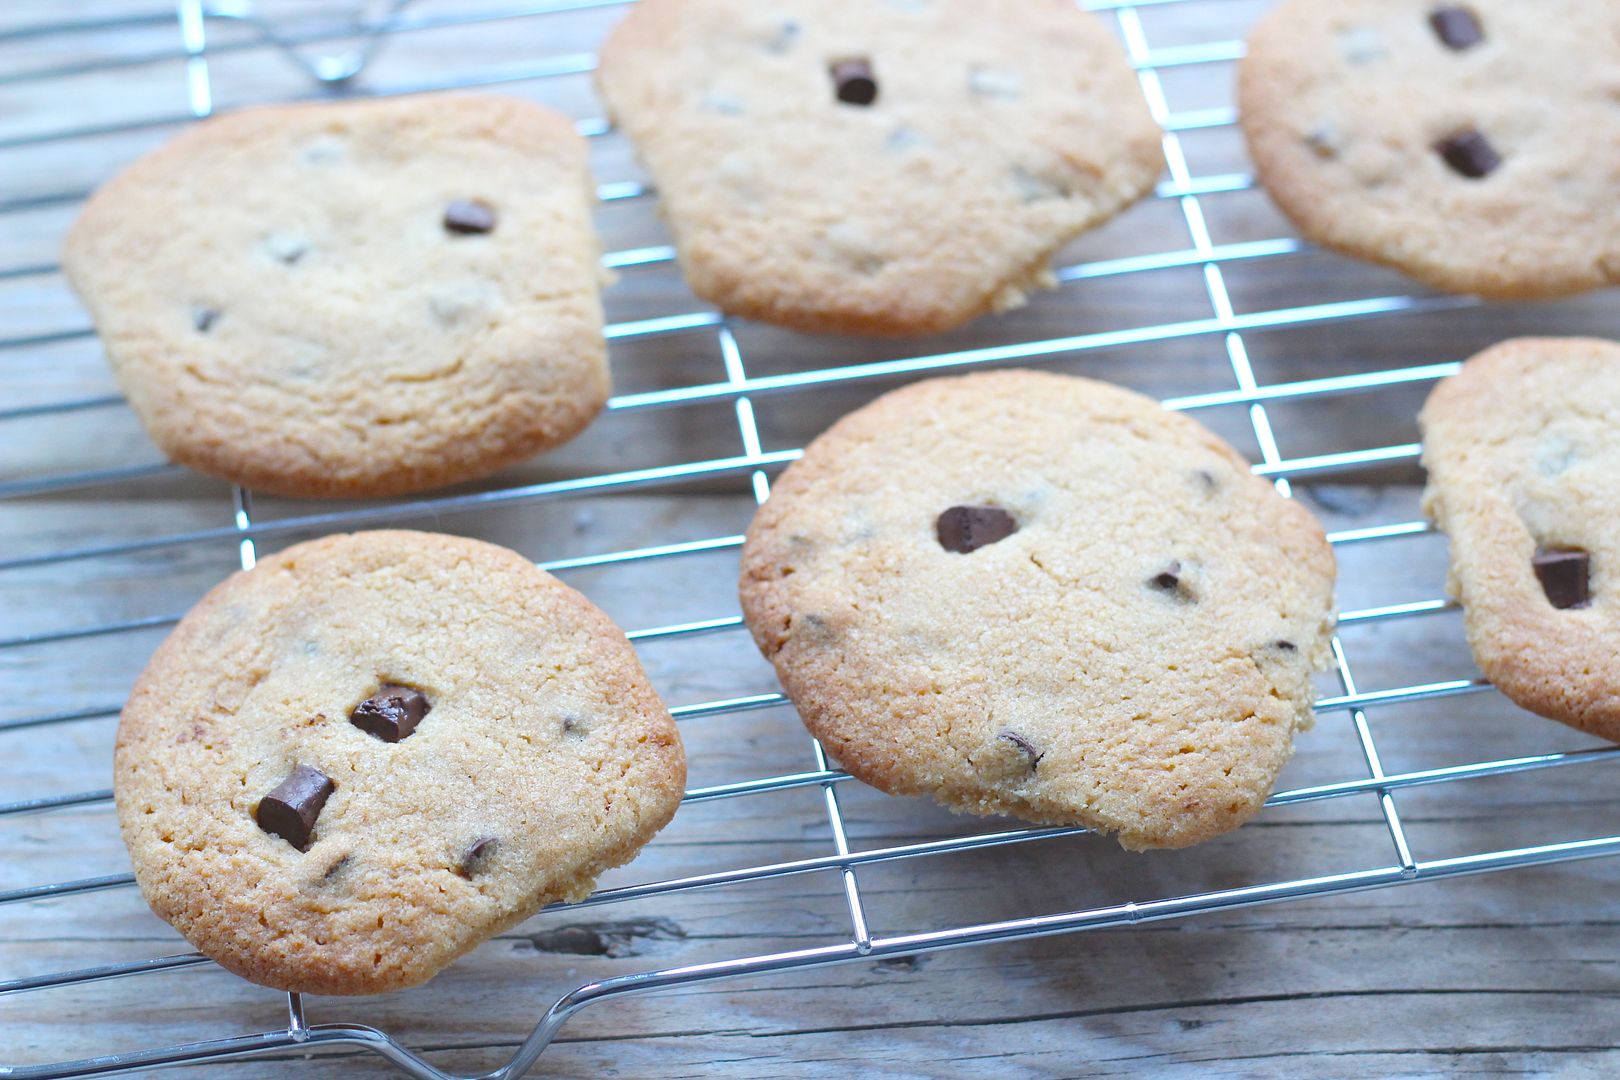  chocolate chip cookies